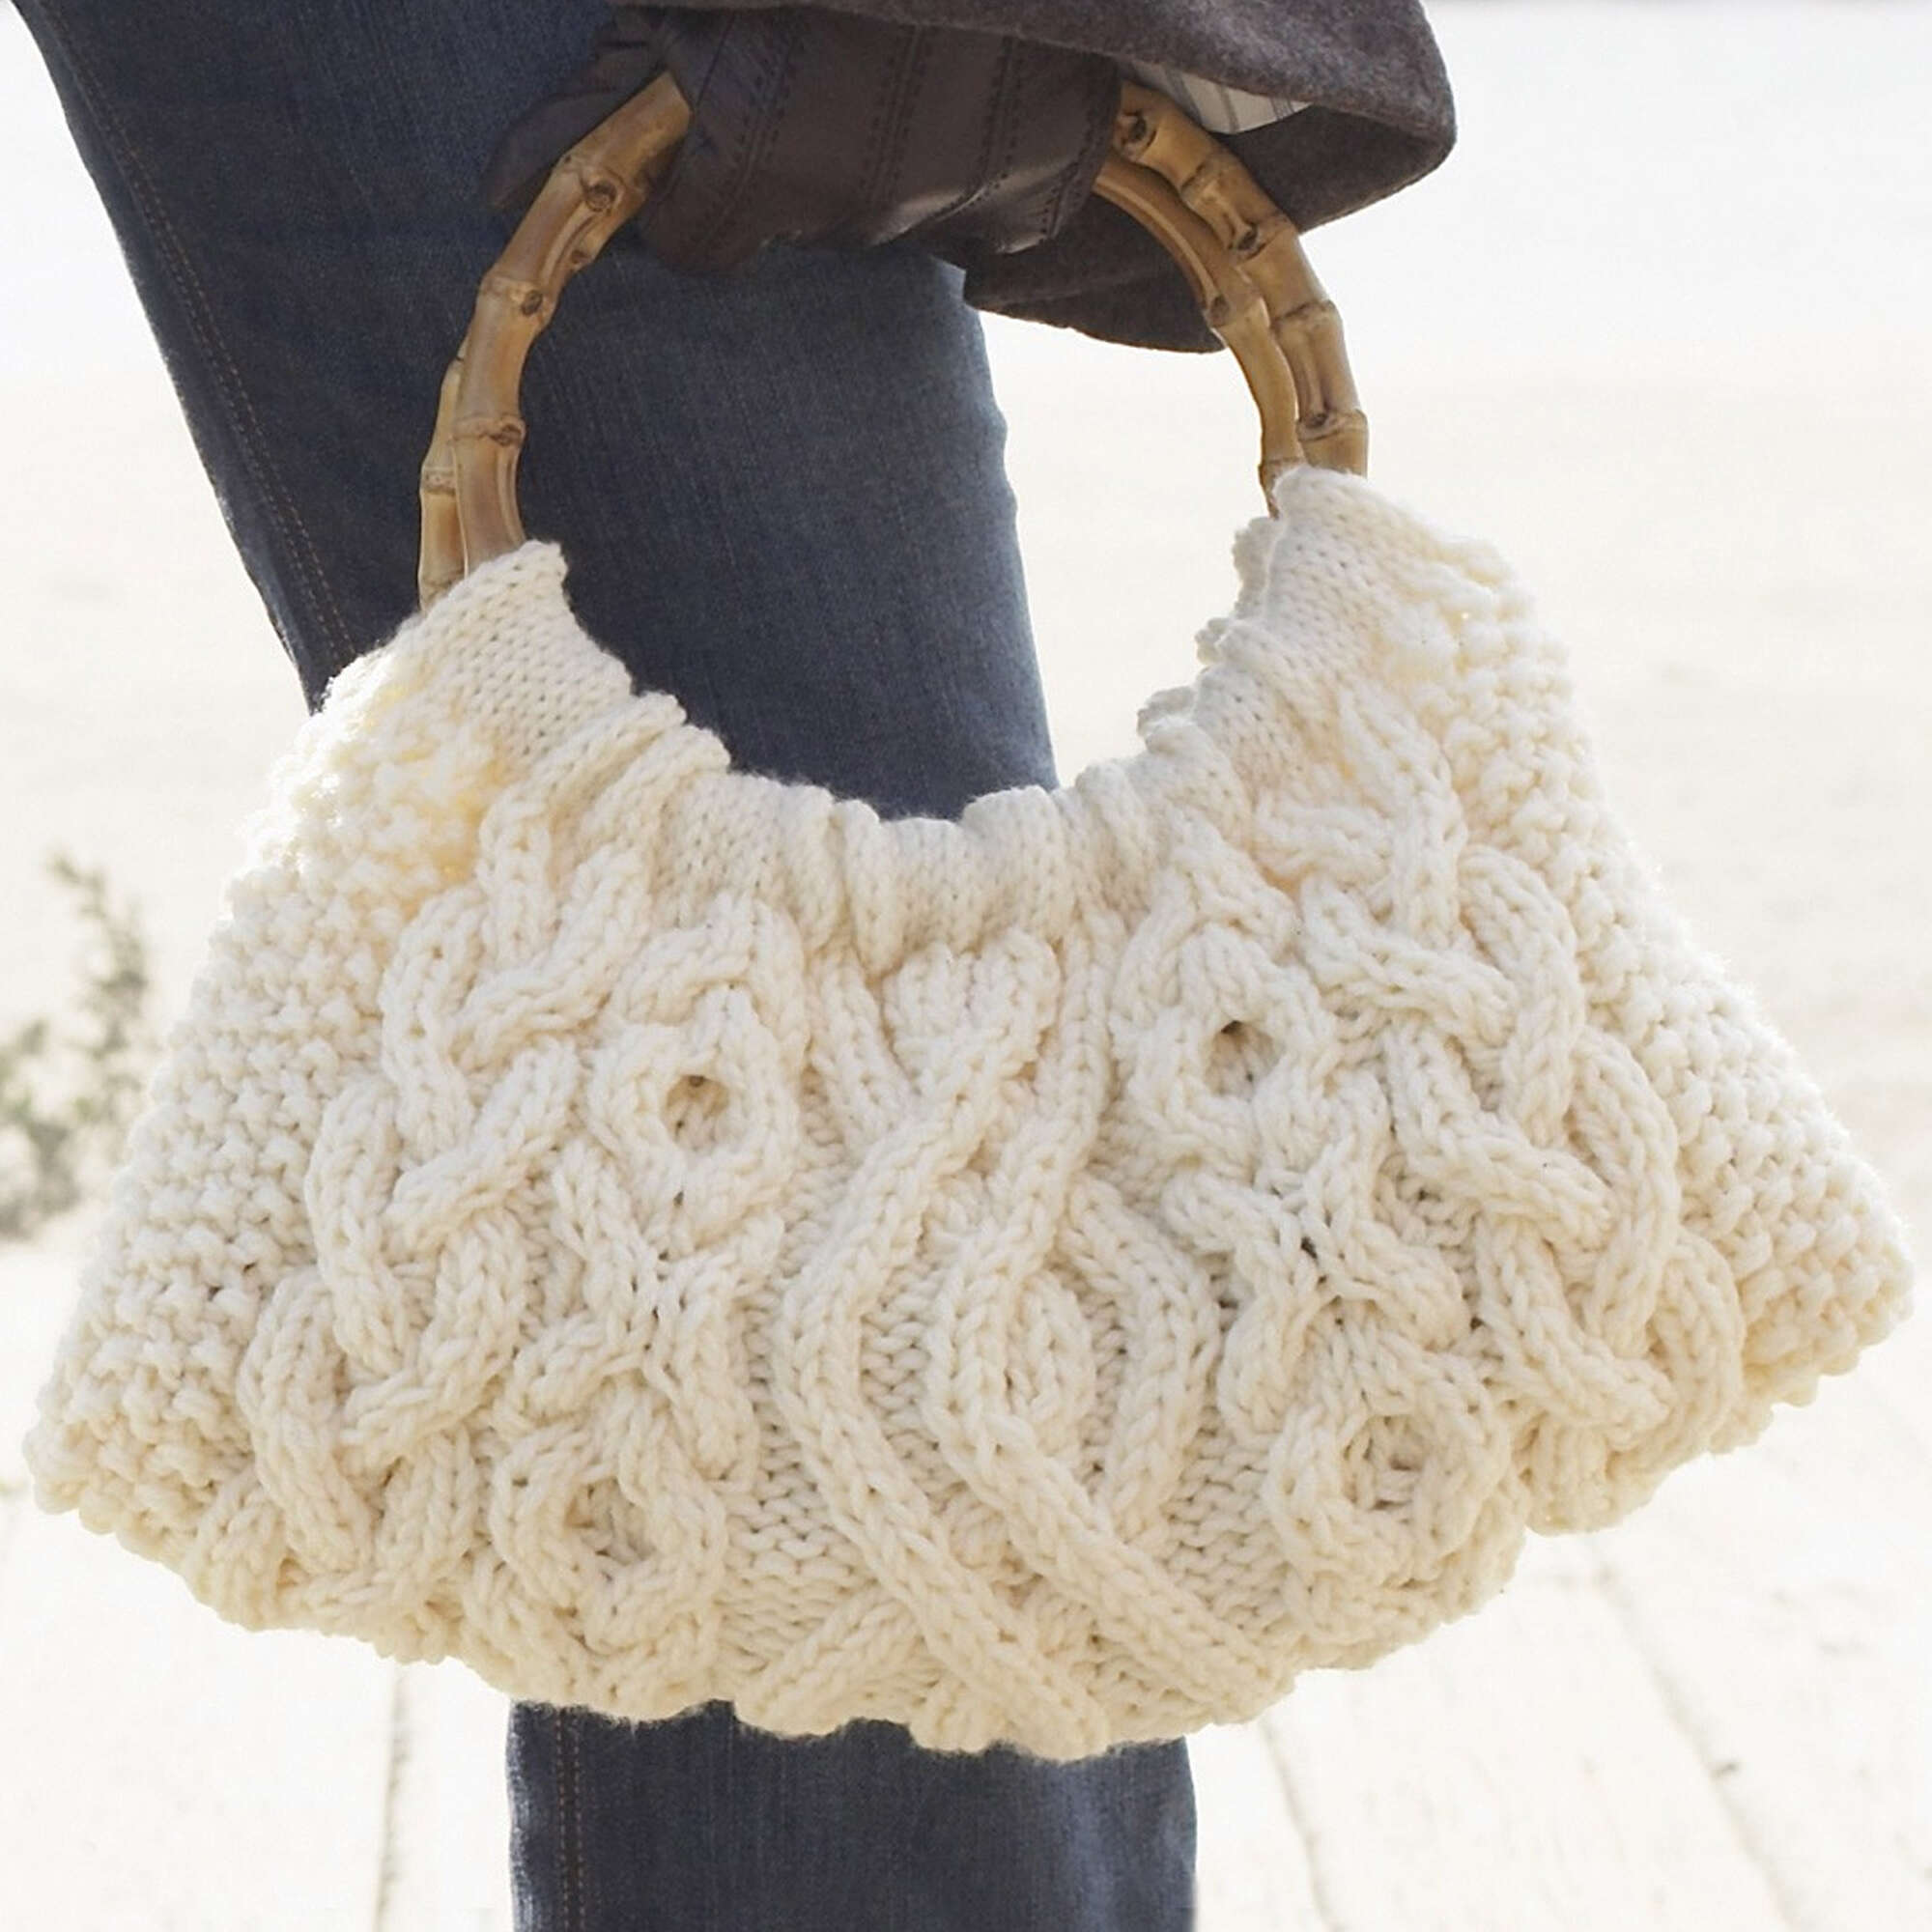 Mini Cable Bag Free Knitting Pattern and Video Tutorial  Knitting bag  pattern, Diy crochet projects, Crochet projects